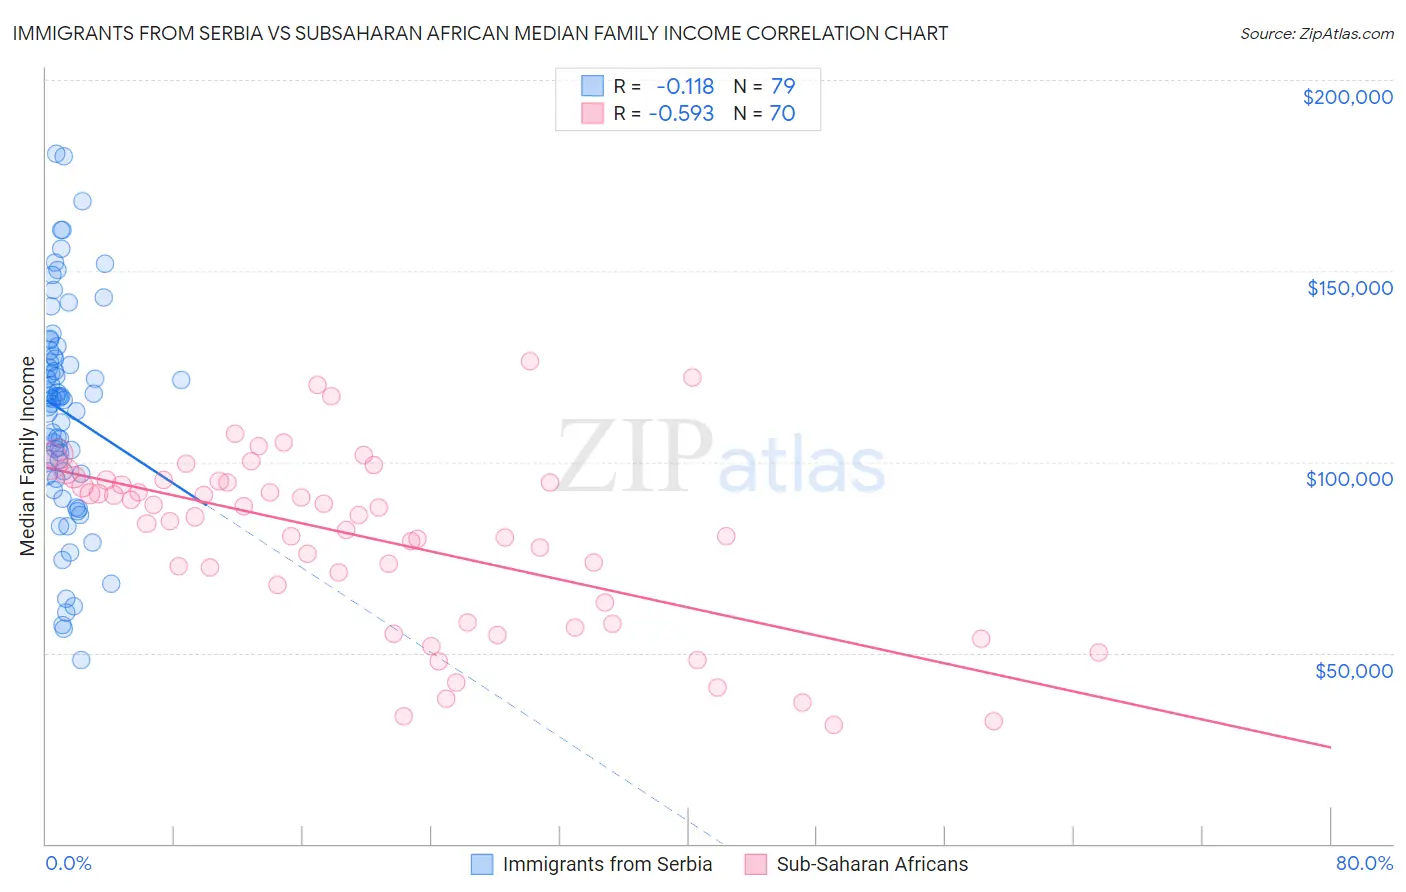 Immigrants from Serbia vs Subsaharan African Median Family Income